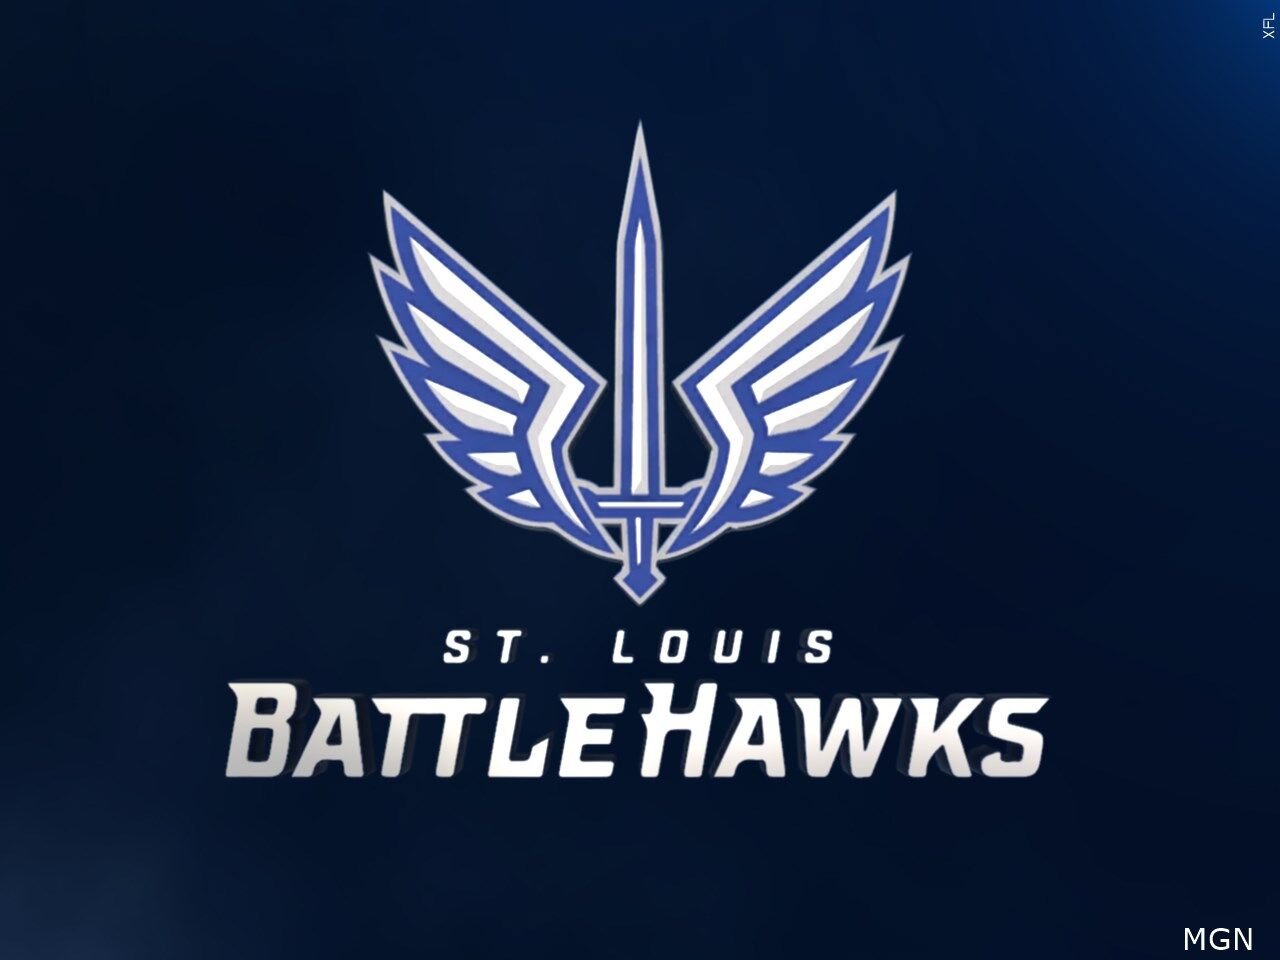 Everything You Need to Know about the St. Louis Battlehawks